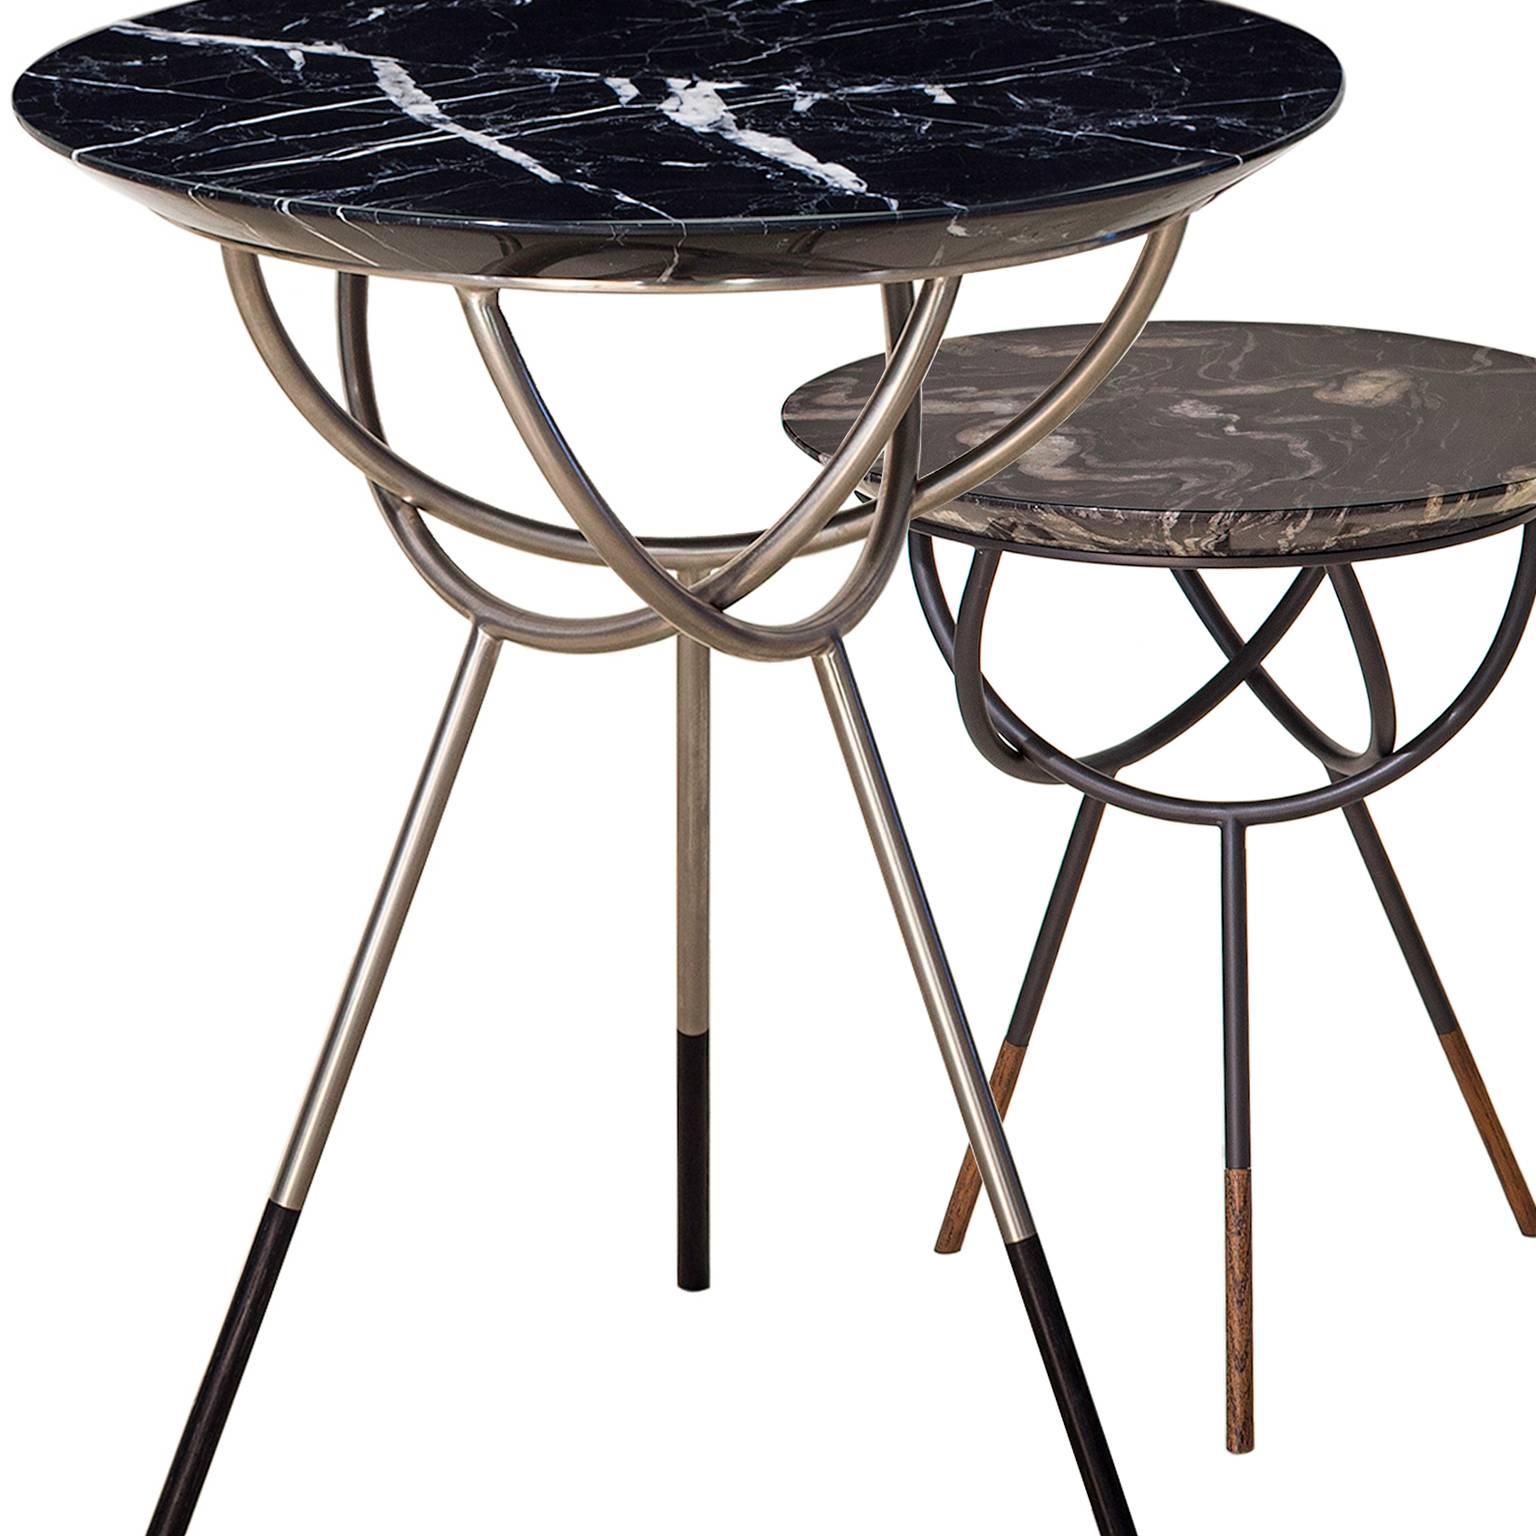 Contemporary Atlas Brushed Brass Side Table with White Marble Top by Avram Rusu Studio For Sale